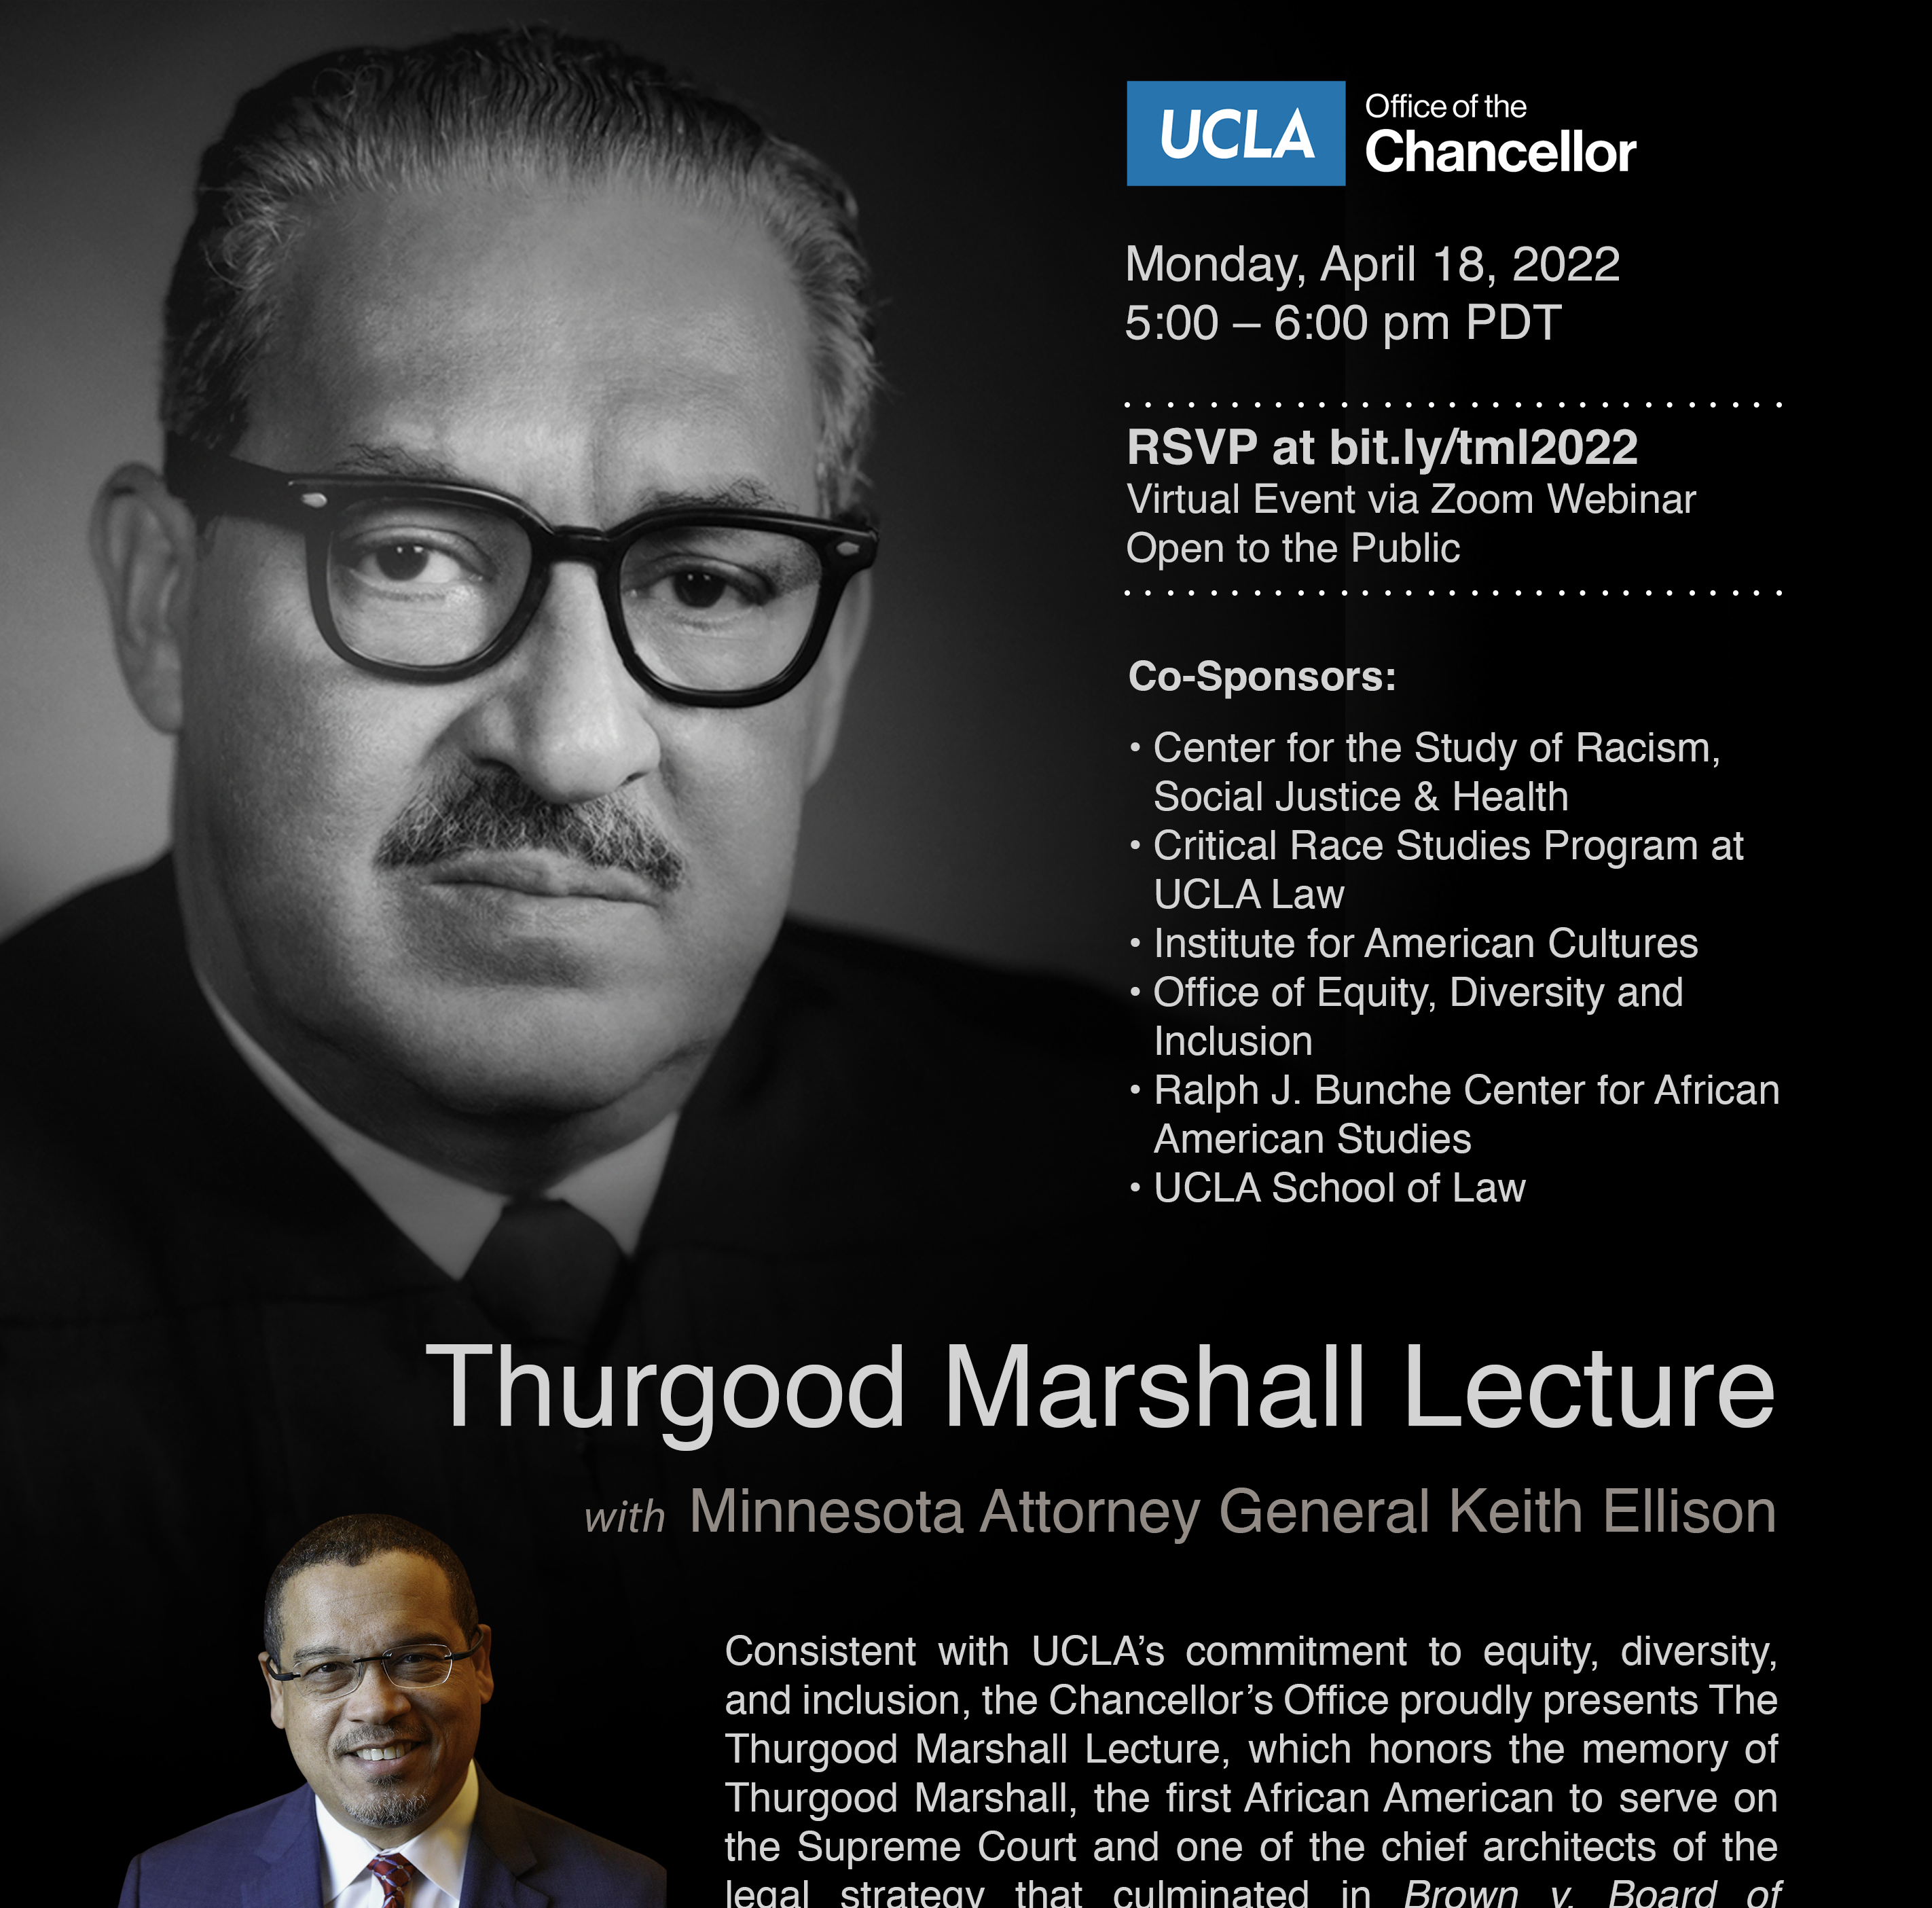 flyer for 2022 thurgood marshall lecture, featuring Minnesota Attorney General Keith Ellison, taking place on Monday, April 18, 2022